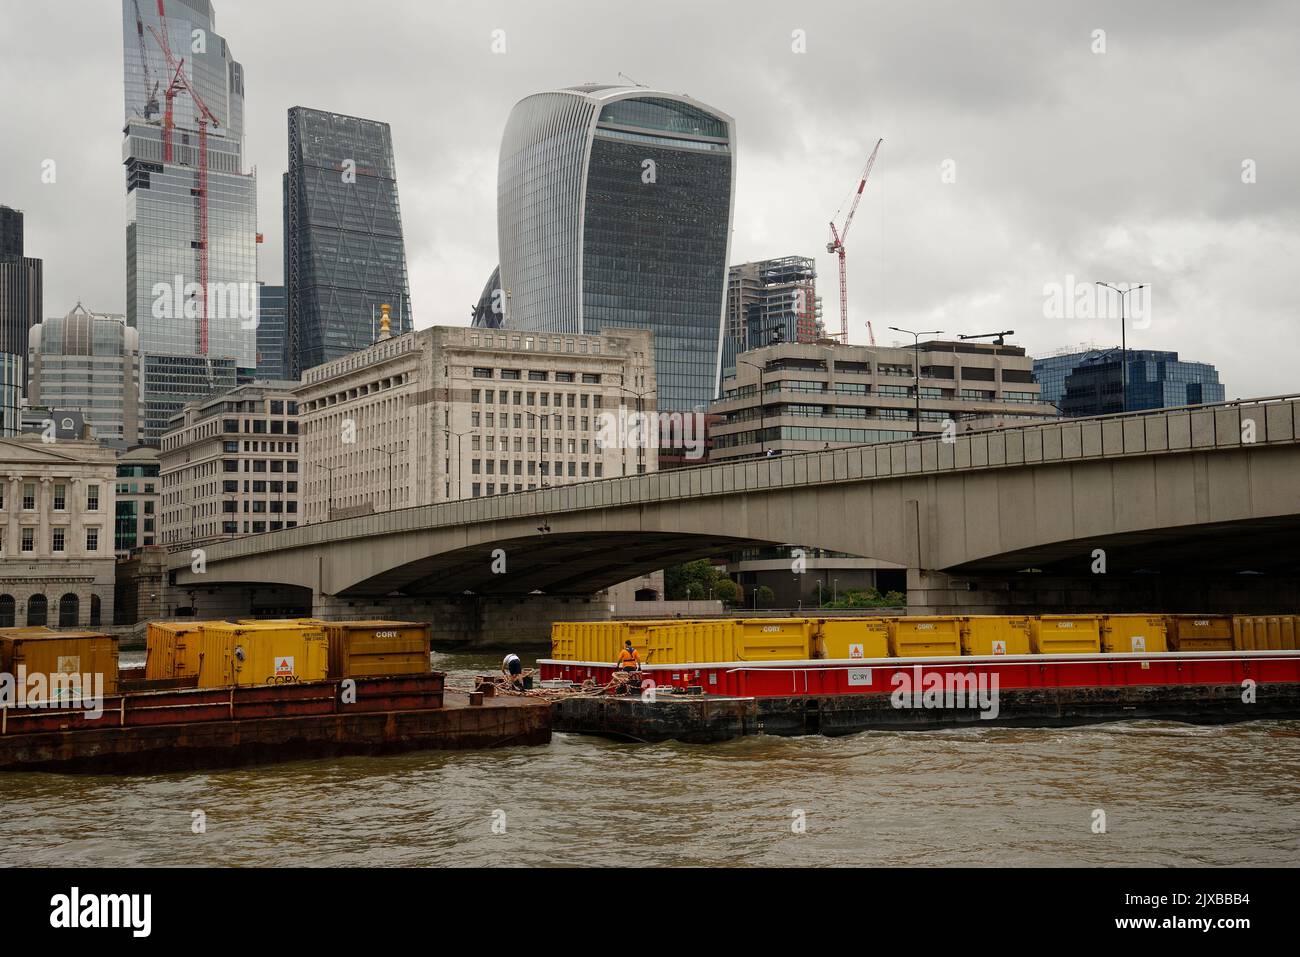 The City of London with barges laden with containers on the river Thames. Stock Photo